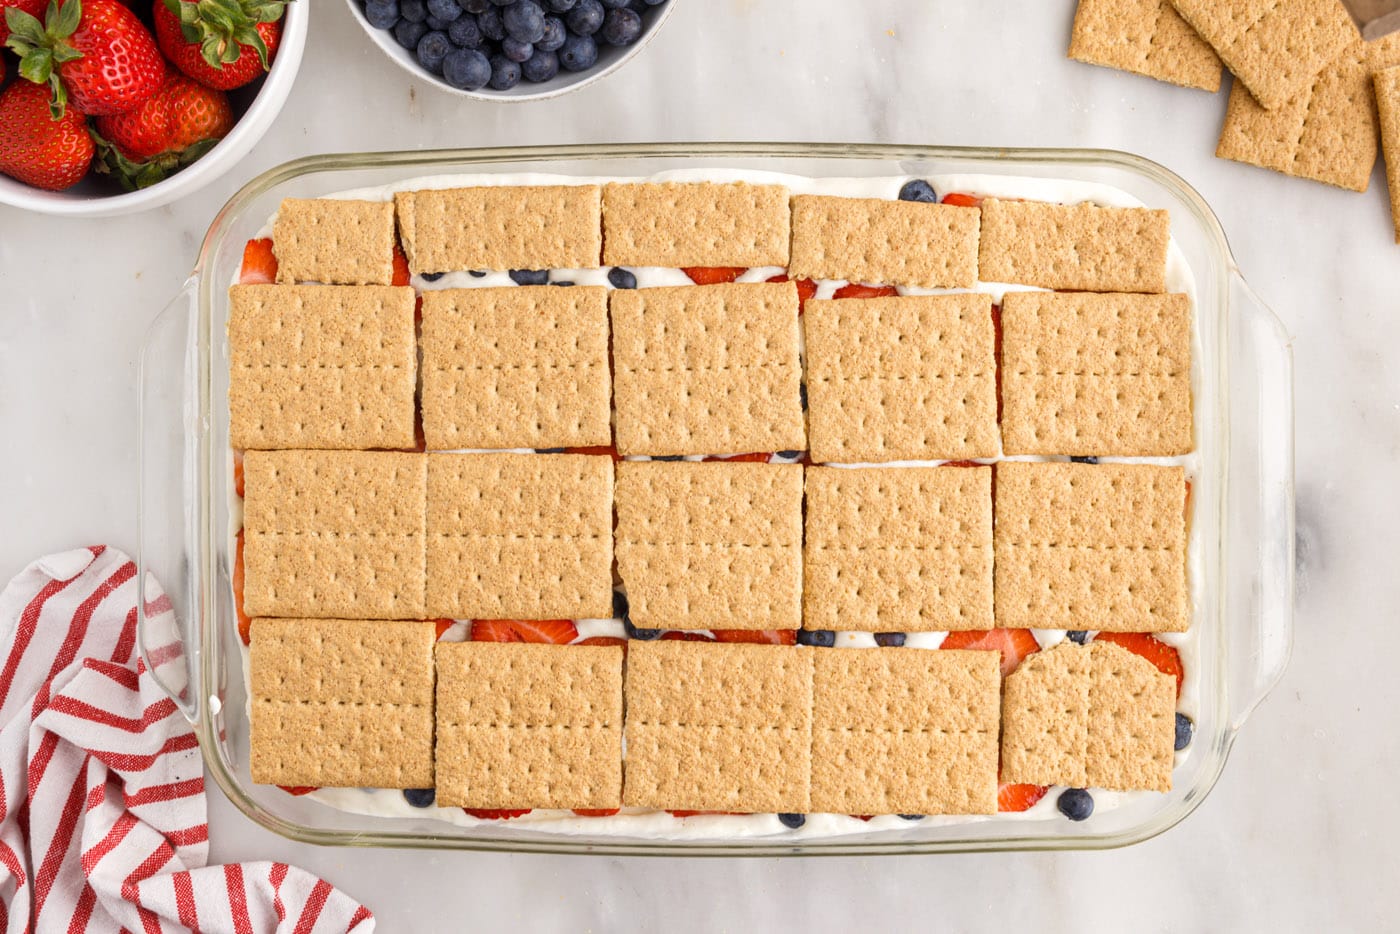 Layer of graham crackers over the fresh berries